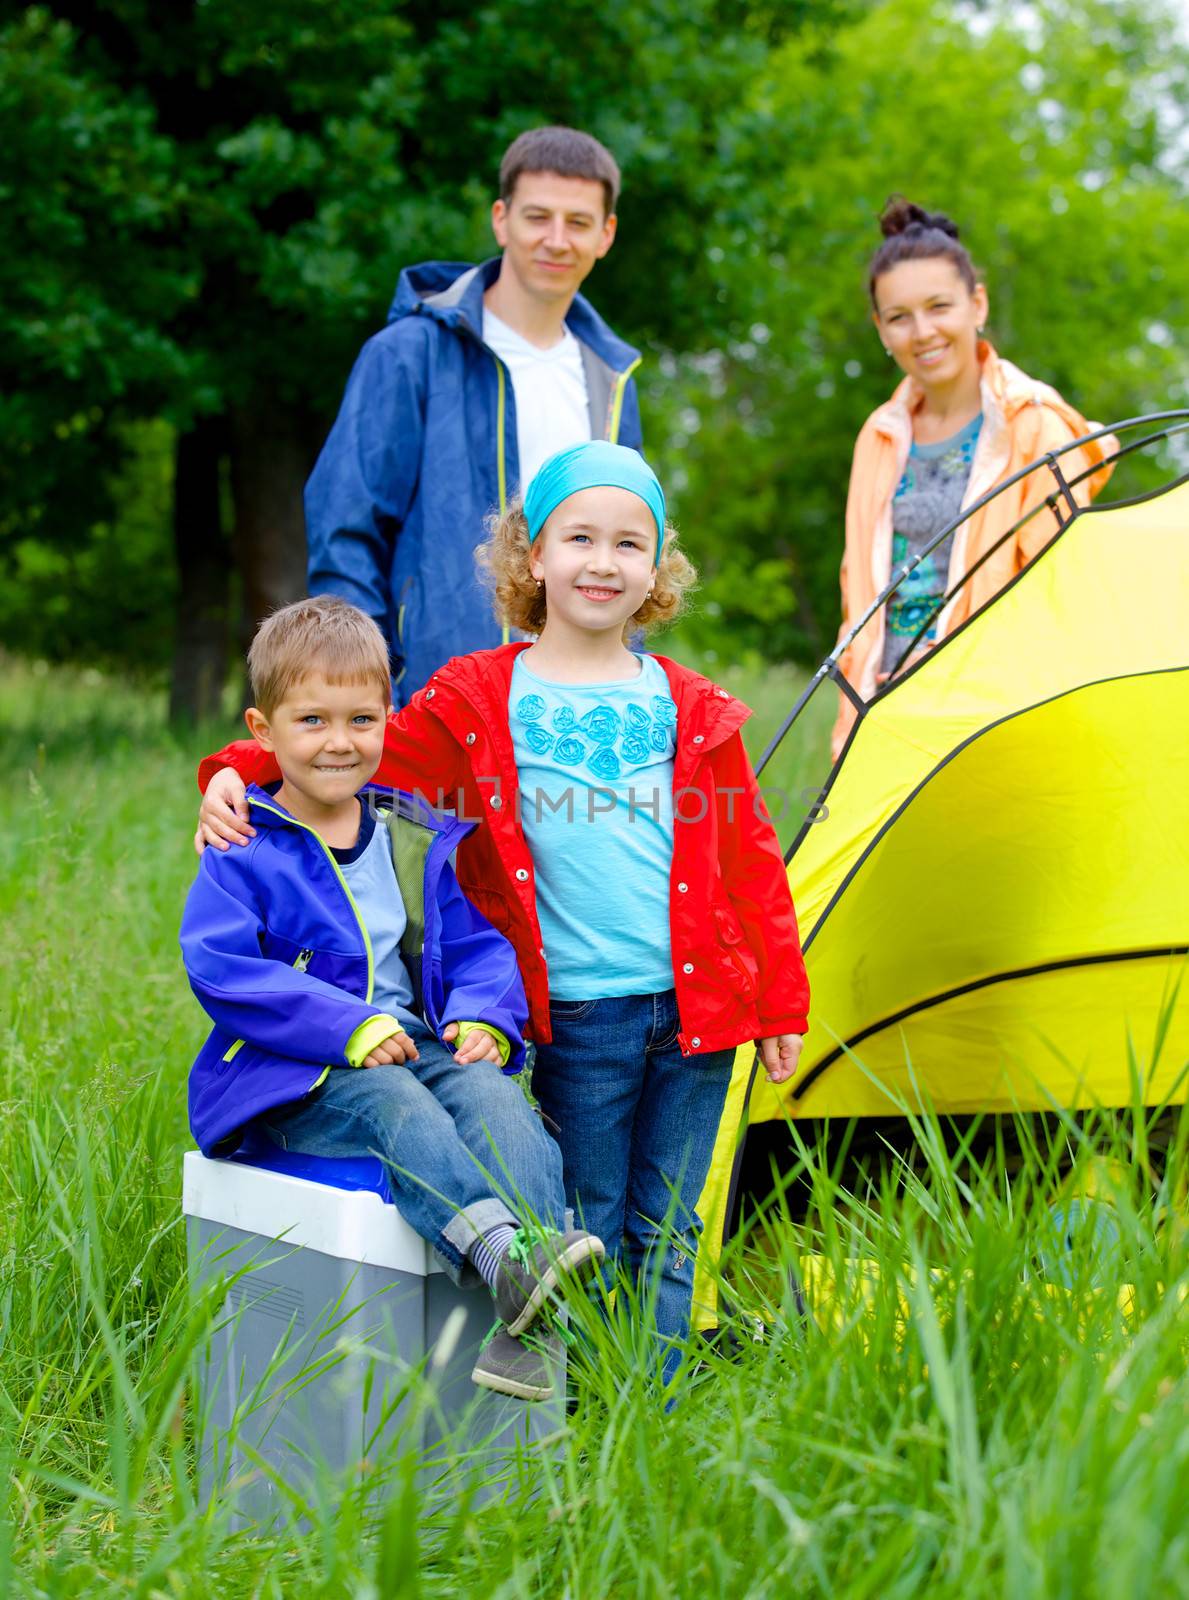 Summer, family camping - lovely sister and brother with parents near camp tent. Vertical view